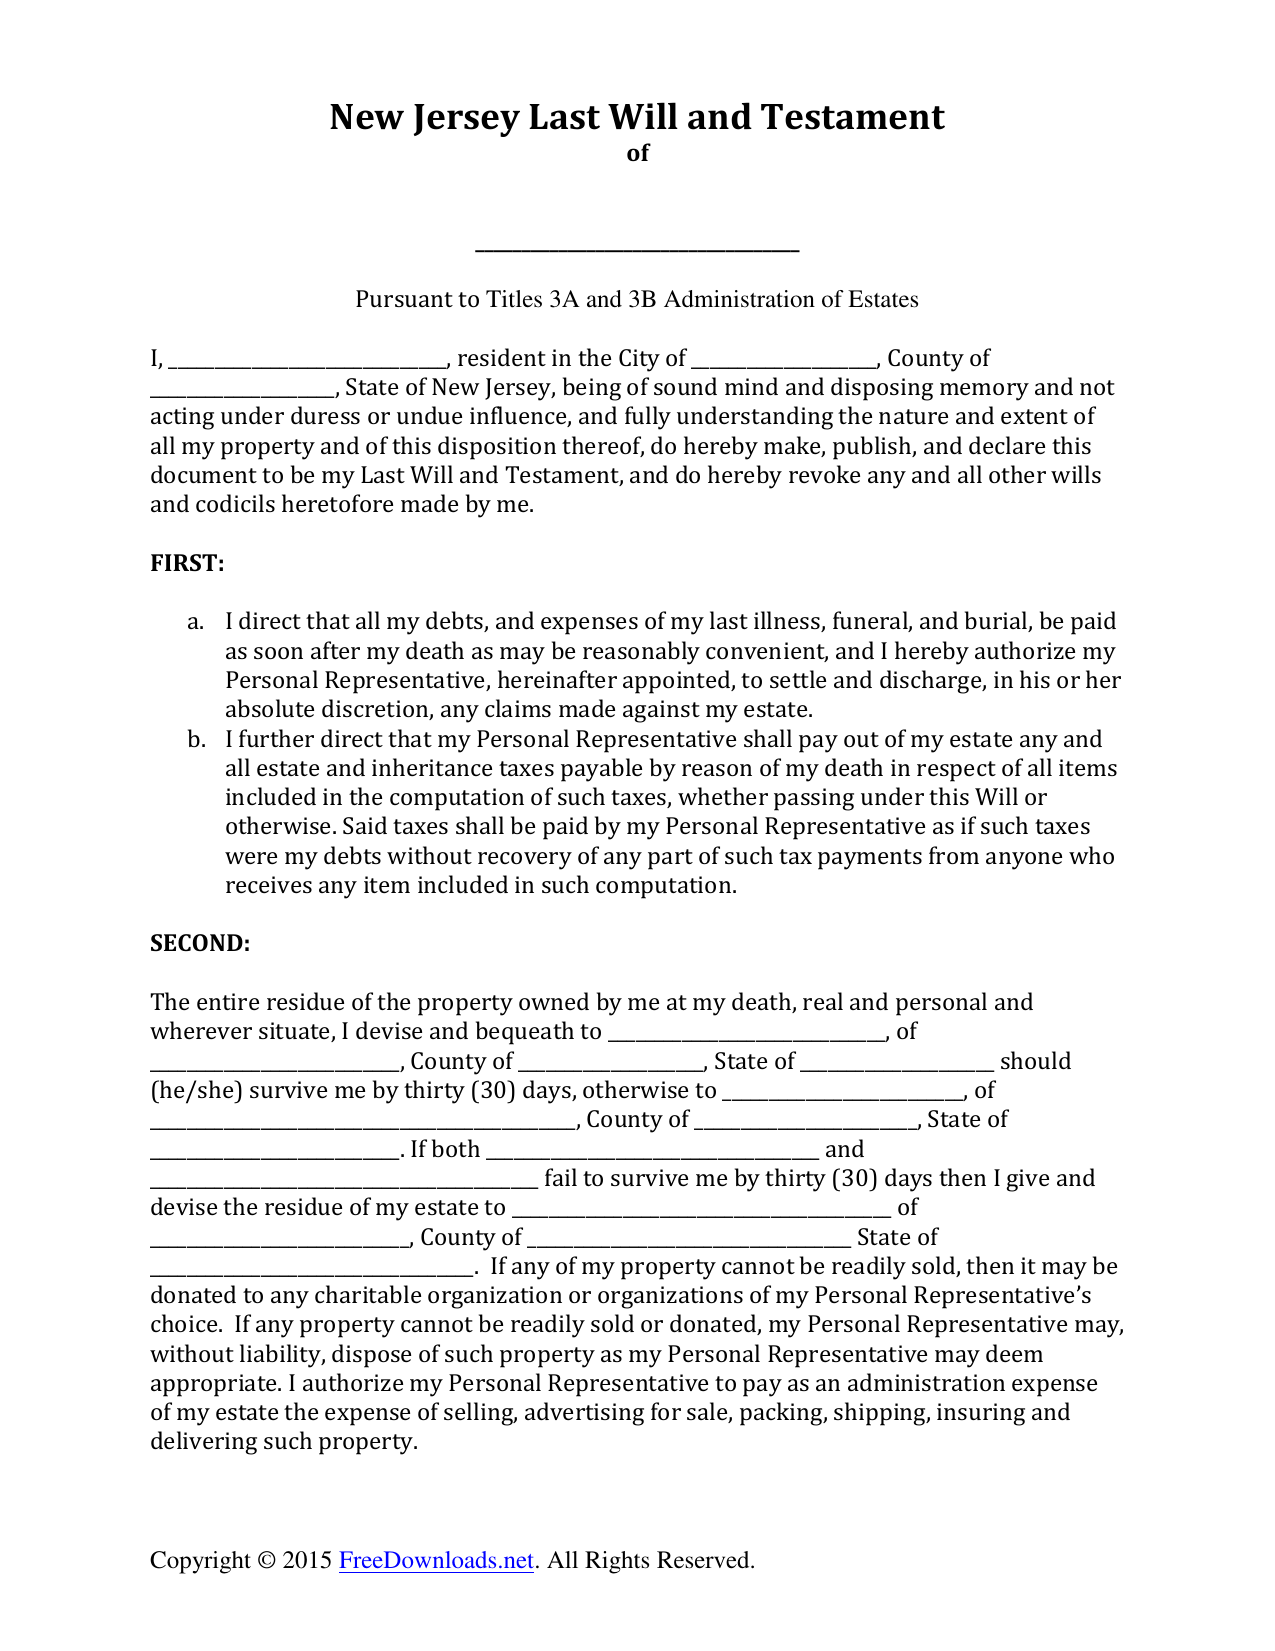 Download New Jersey Last Will and Testament Form PDF RTF Word